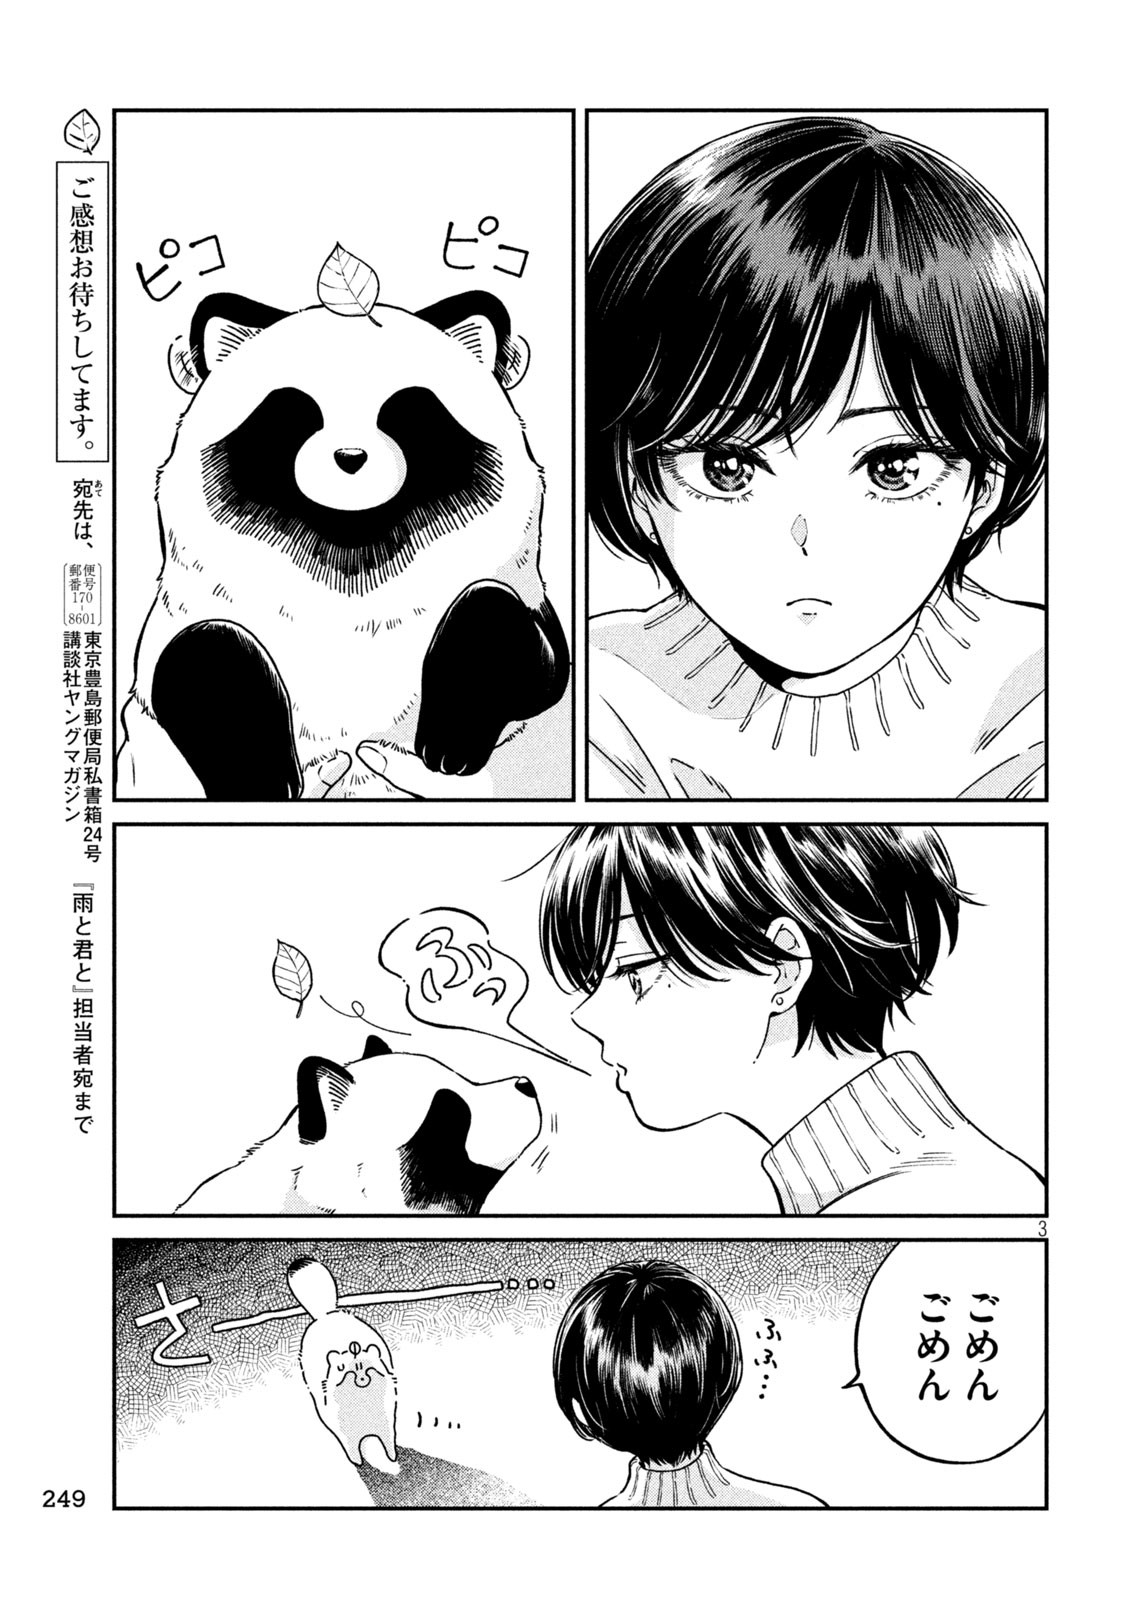 Ame to Kimi to - Chapter 109 - Page 3